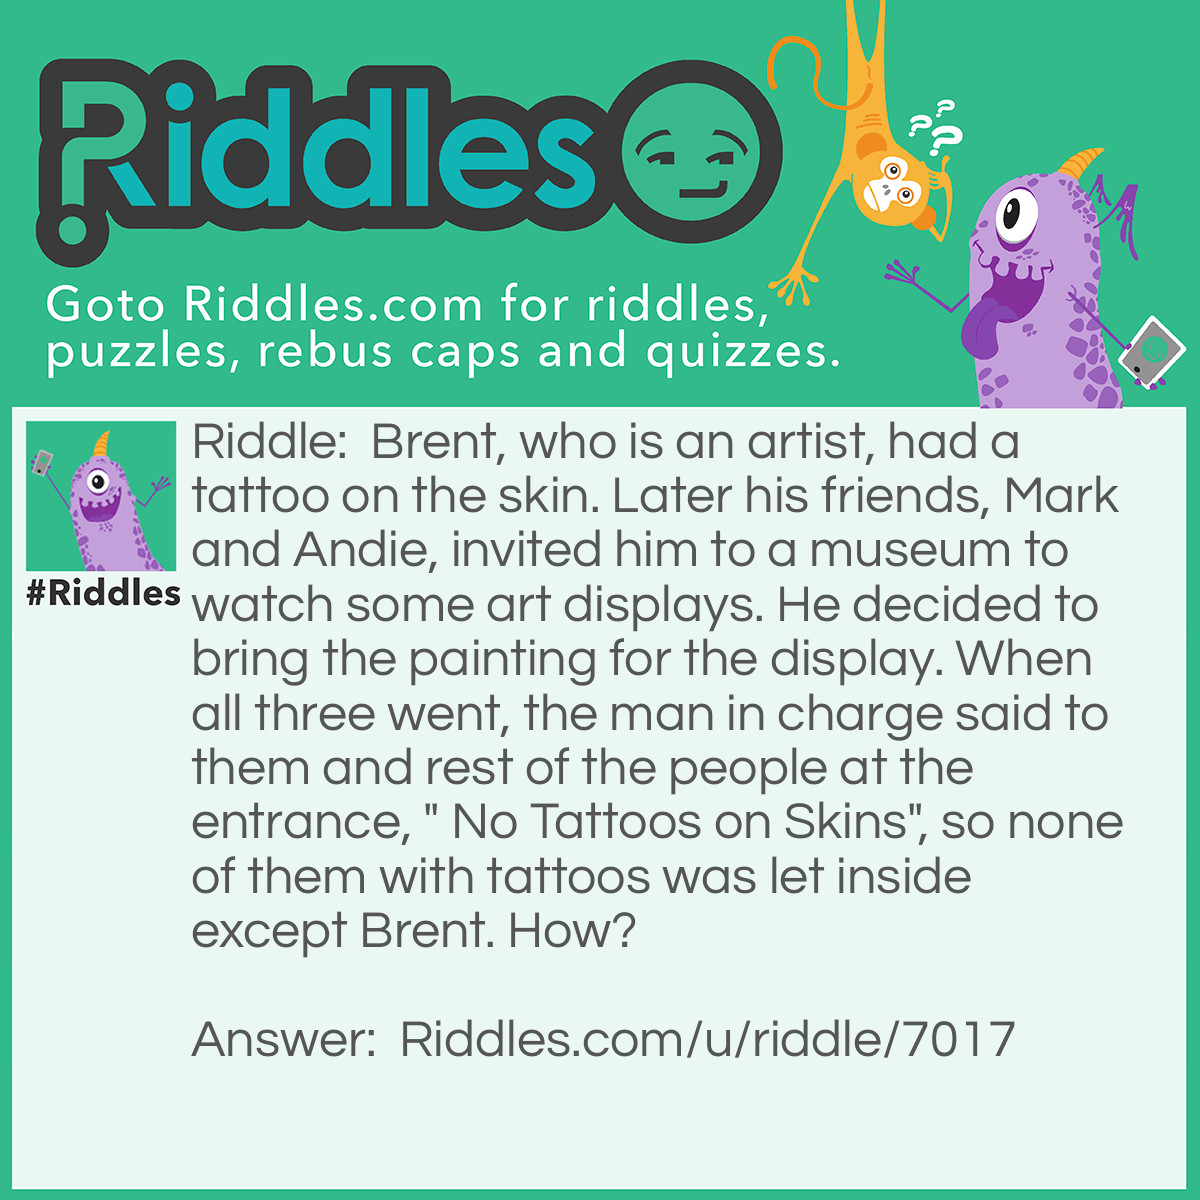 Riddle: Brent, who is an artist, had a tattoo on the skin. Later his friends, Mark and Andie, invited him to a museum to watch some art displays. He decided to bring the painting for the display. When all three went, the man in charge said to them and rest of the people at the entrance, " No Tattoos on Skins", so none of them with tattoos was let inside except Brent. How? Answer: He had the "tattoo" on the skin in the painting for the display, not on his own skin.